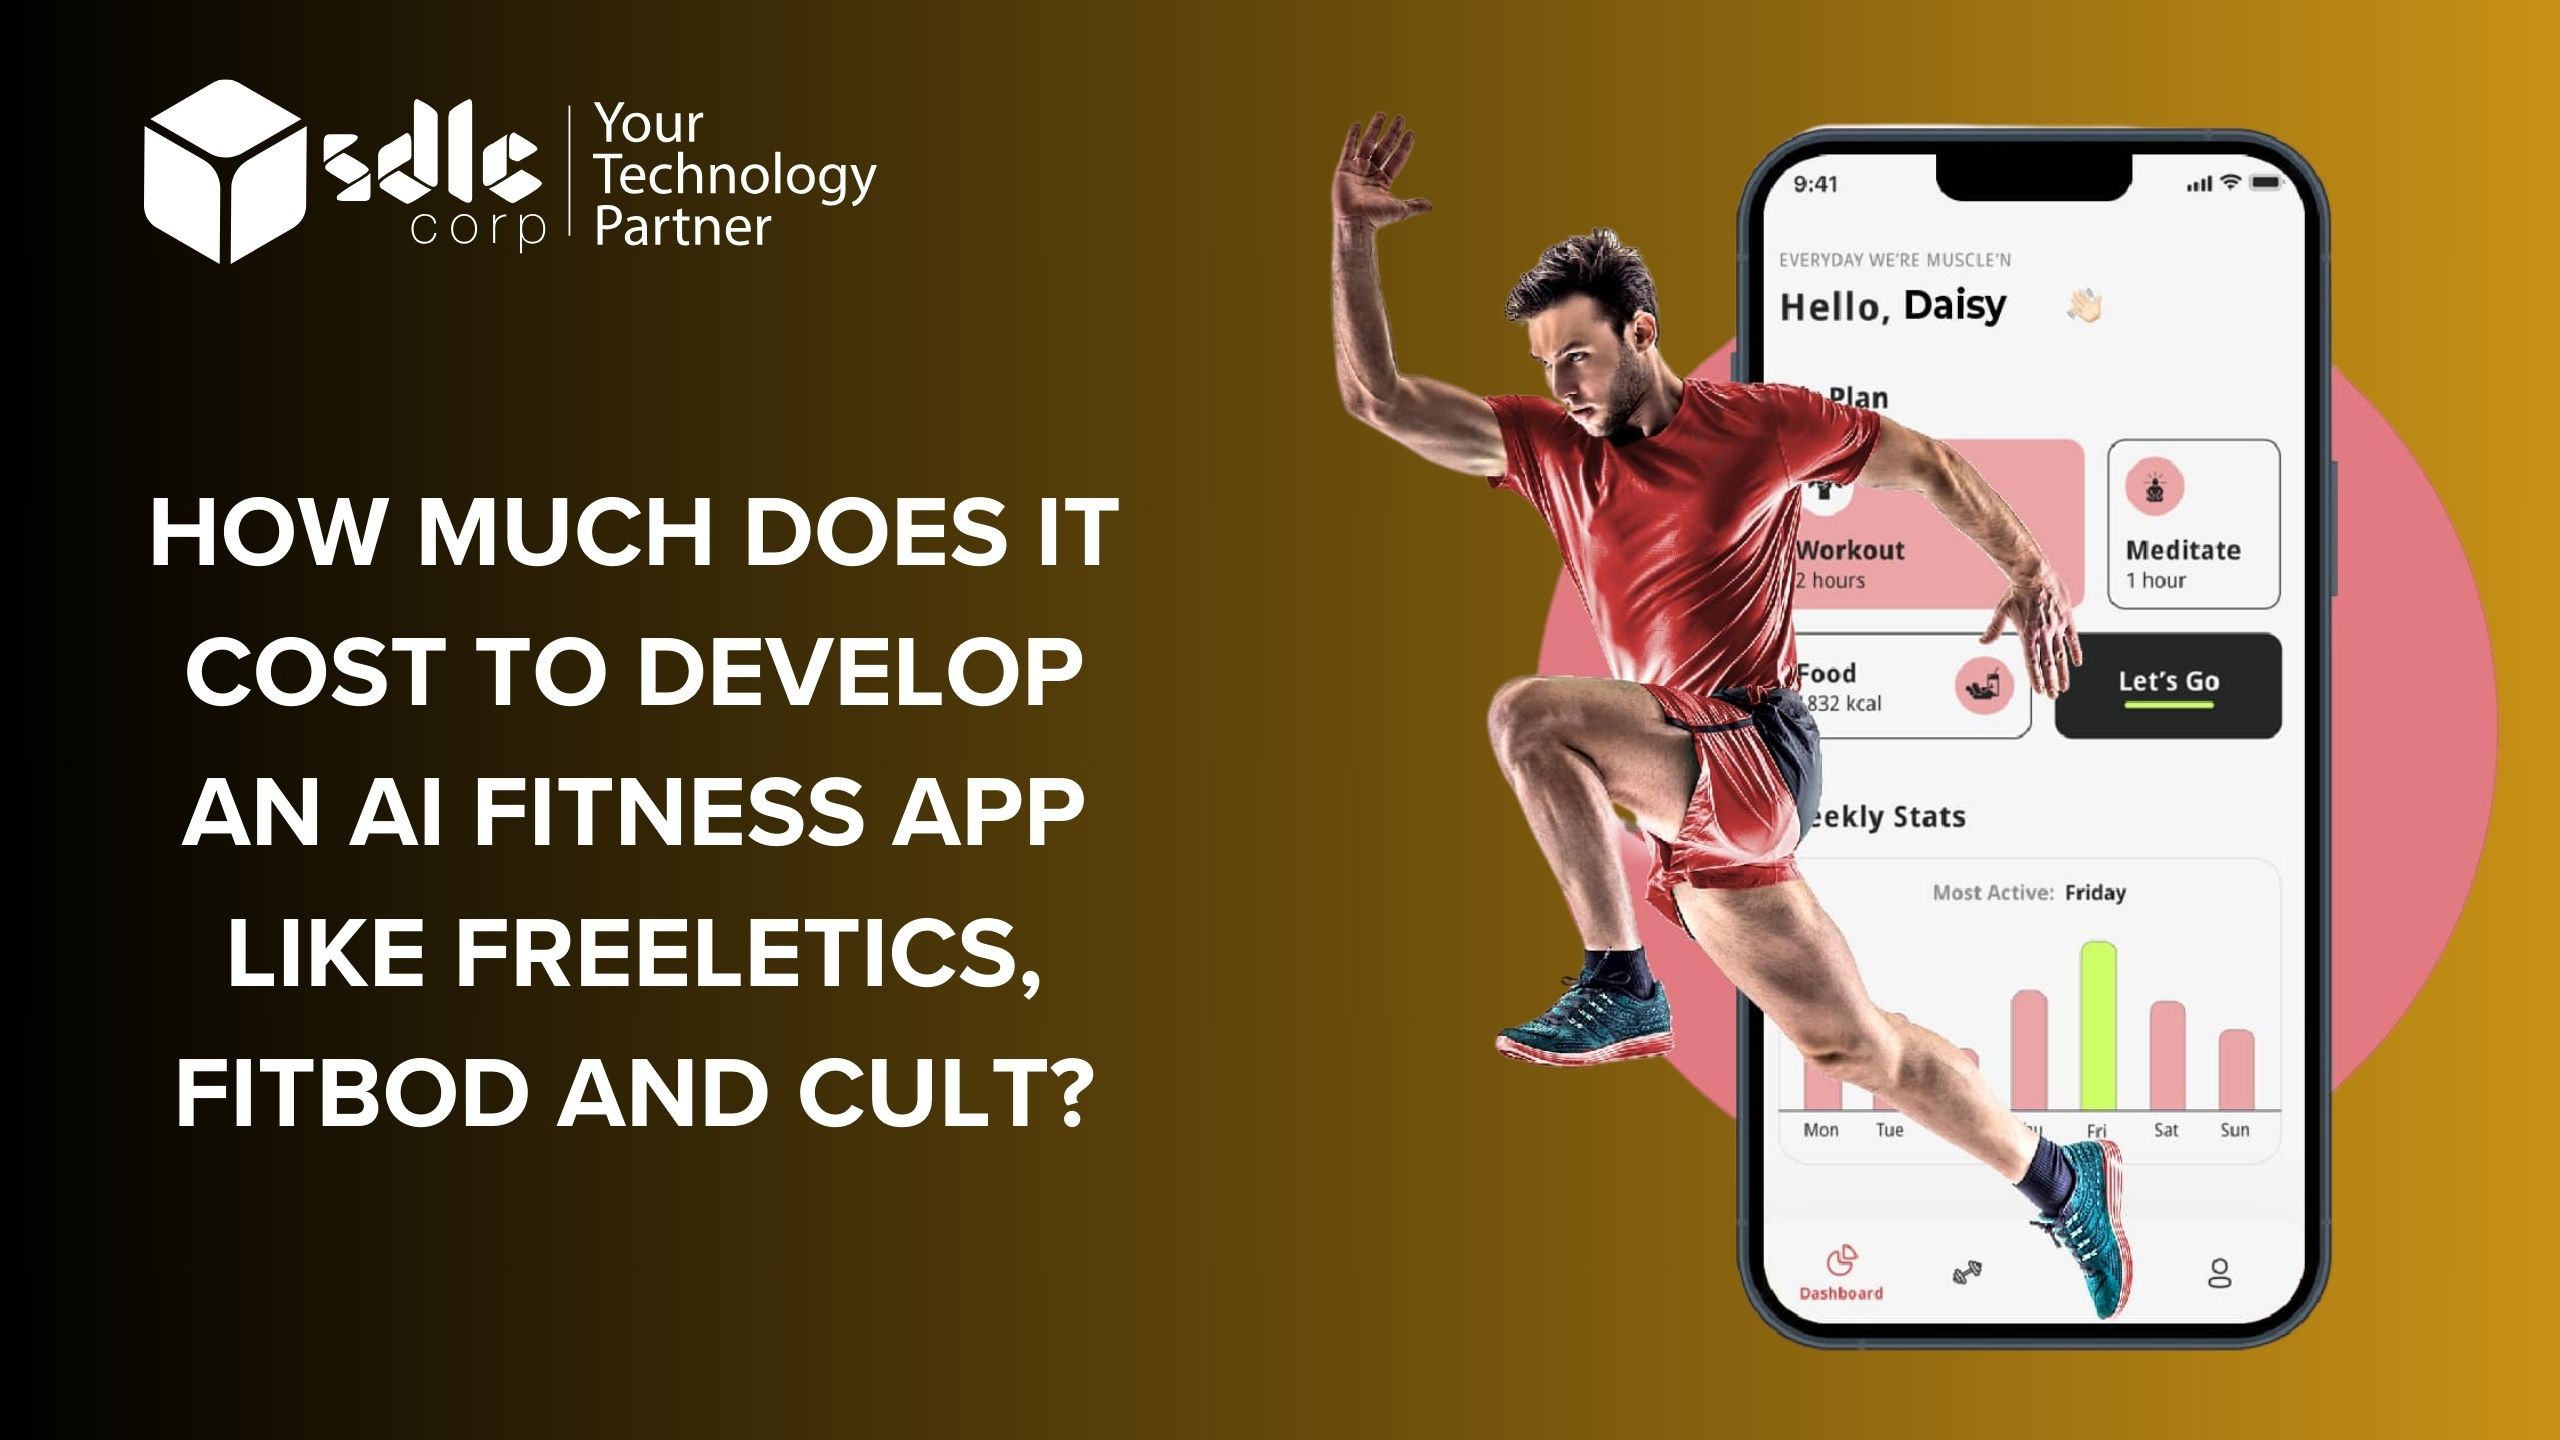 Cost to Develop AI Fitness Apps like Freeletics, Fitbod, cult